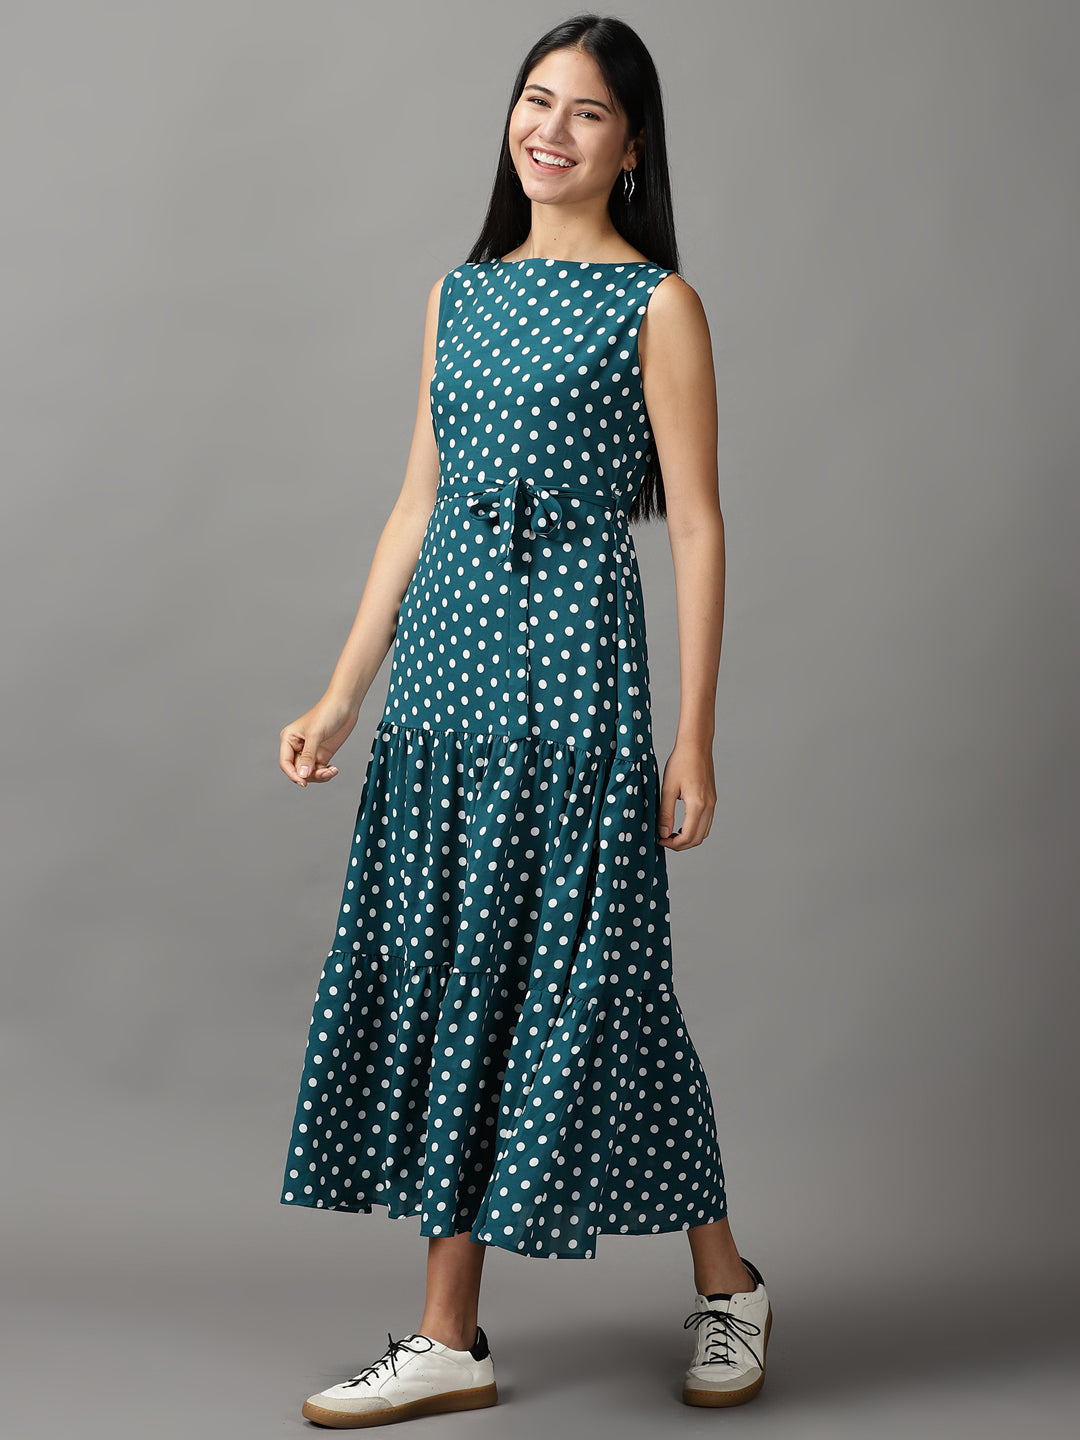 Women's Green Polka Dots Fit and Flare Dress